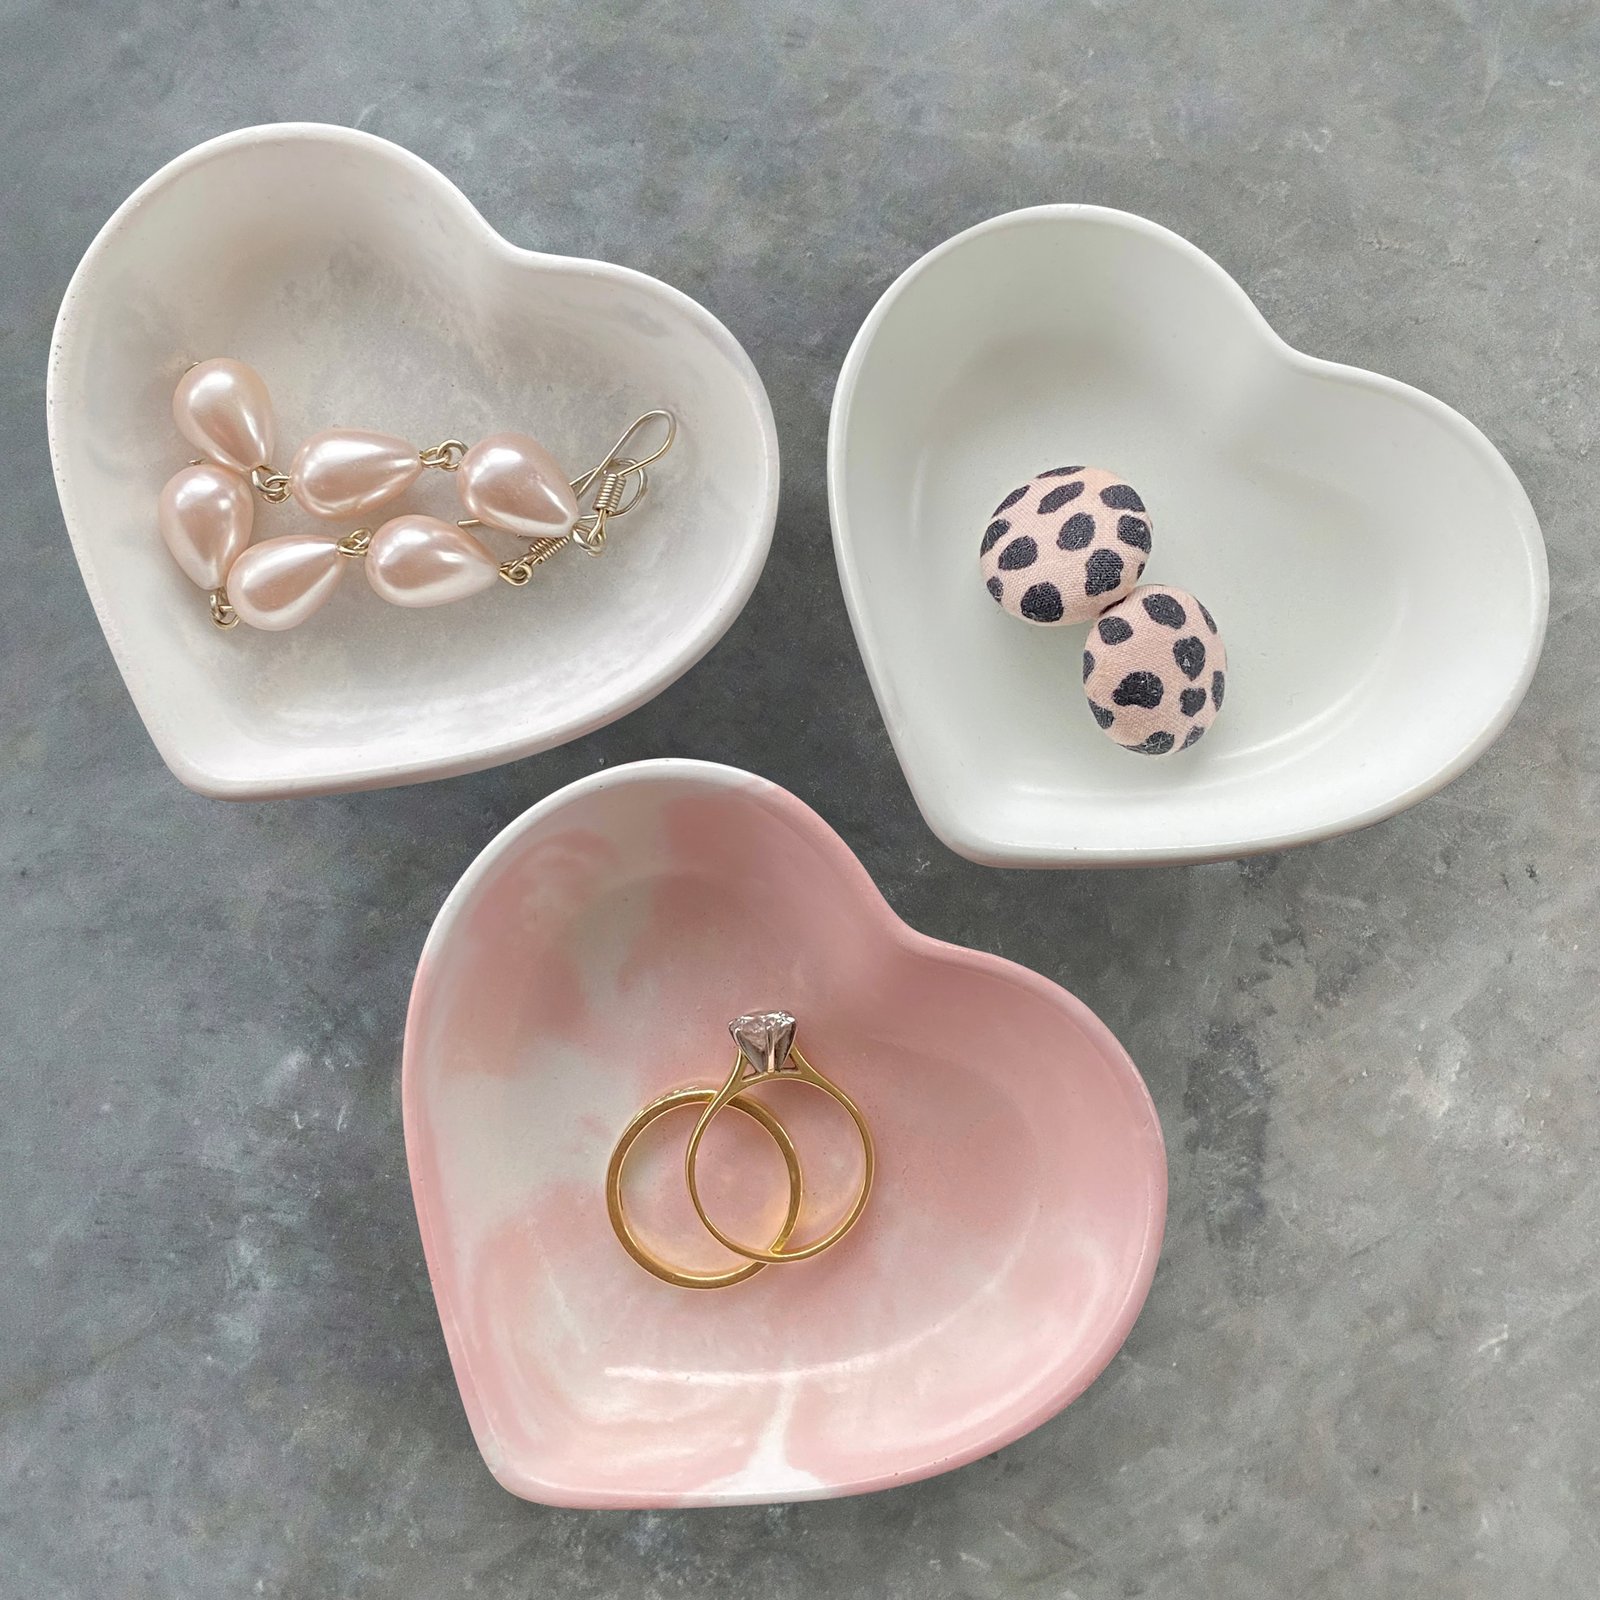 DIY Heart-Shaped Ring Dishes - Happily Eva After